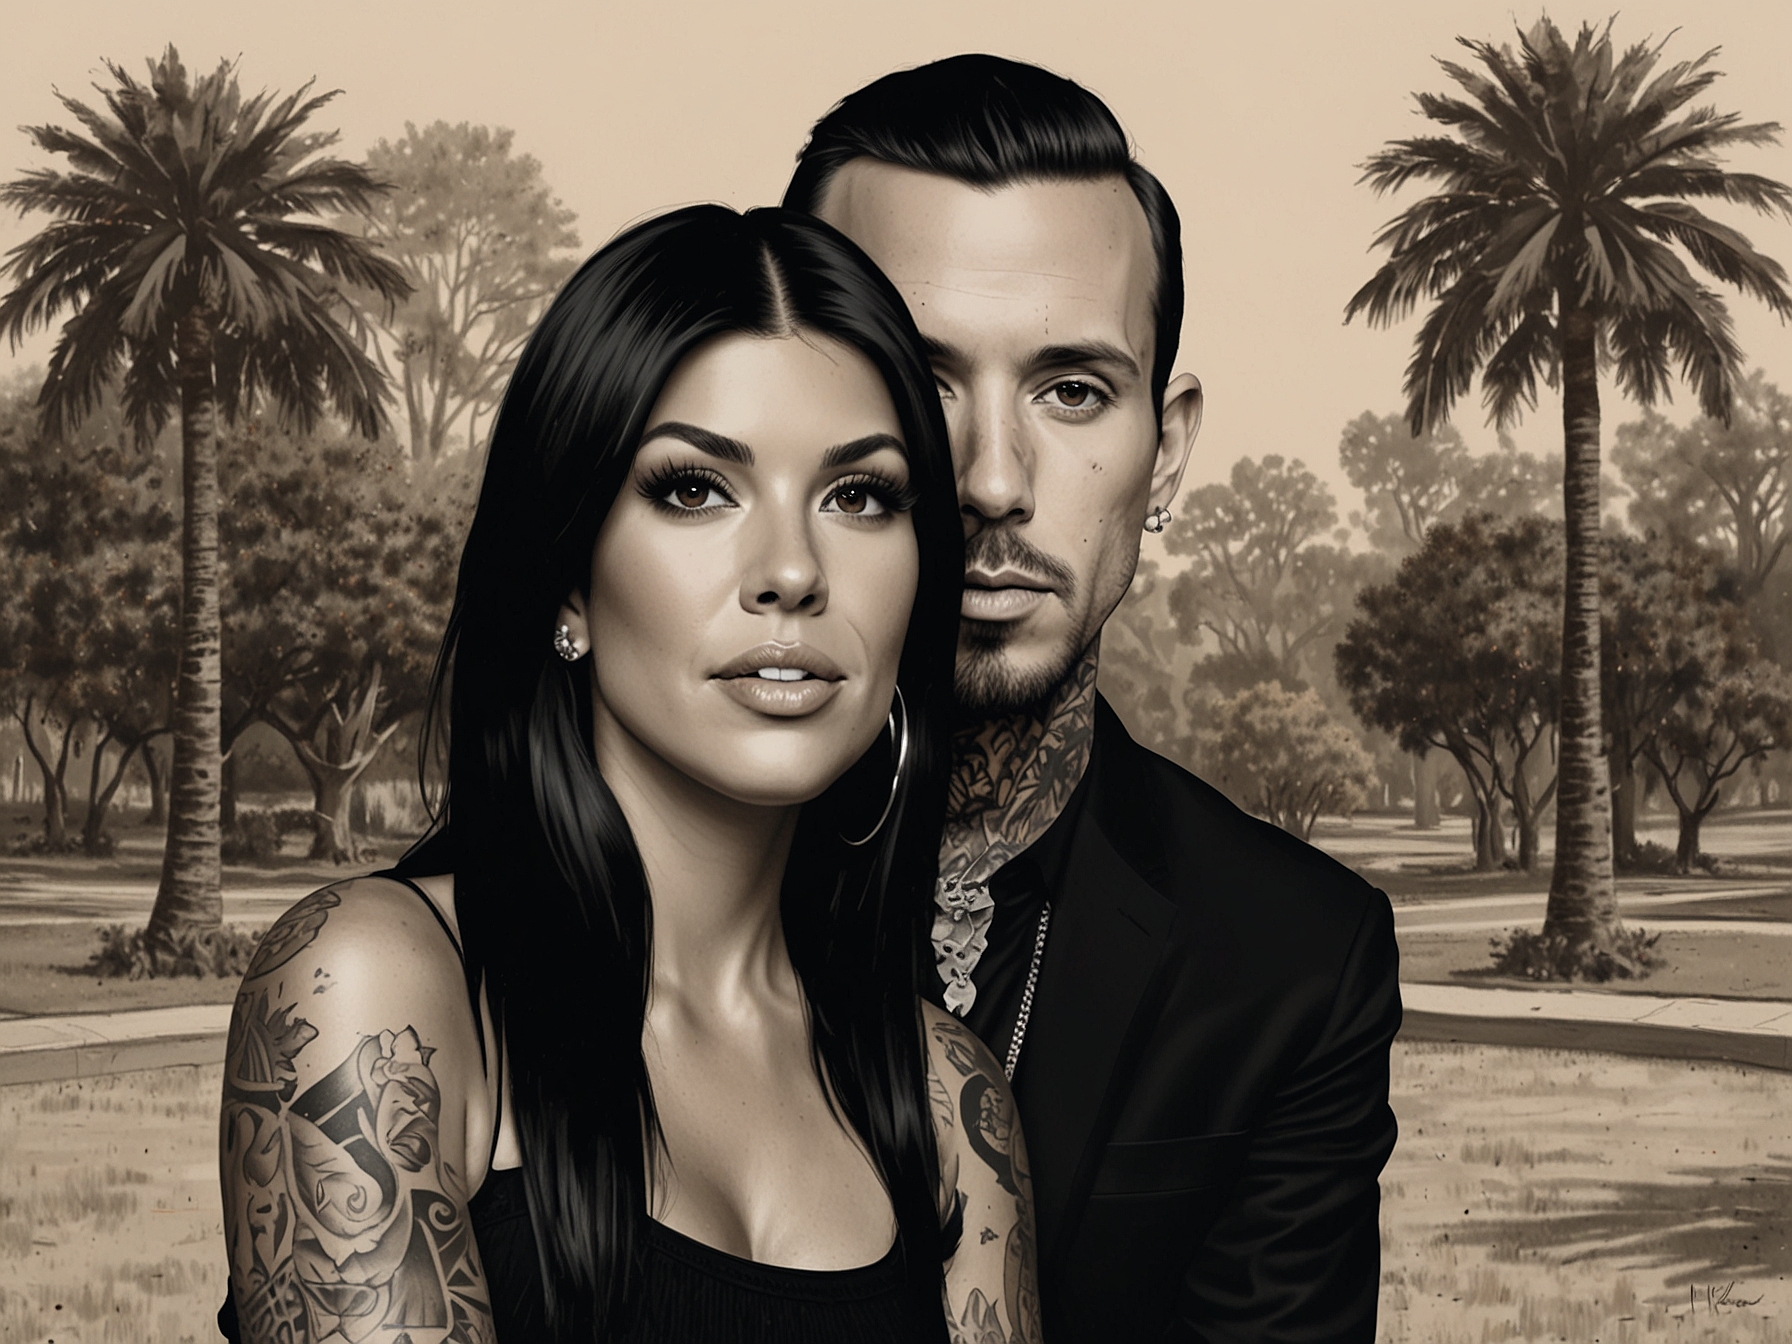 Kourtney Kardashian shares a heartfelt tribute to husband Travis Barker on Instagram. The post, filled with warm messages and photographs, showcases their blended family's moments.